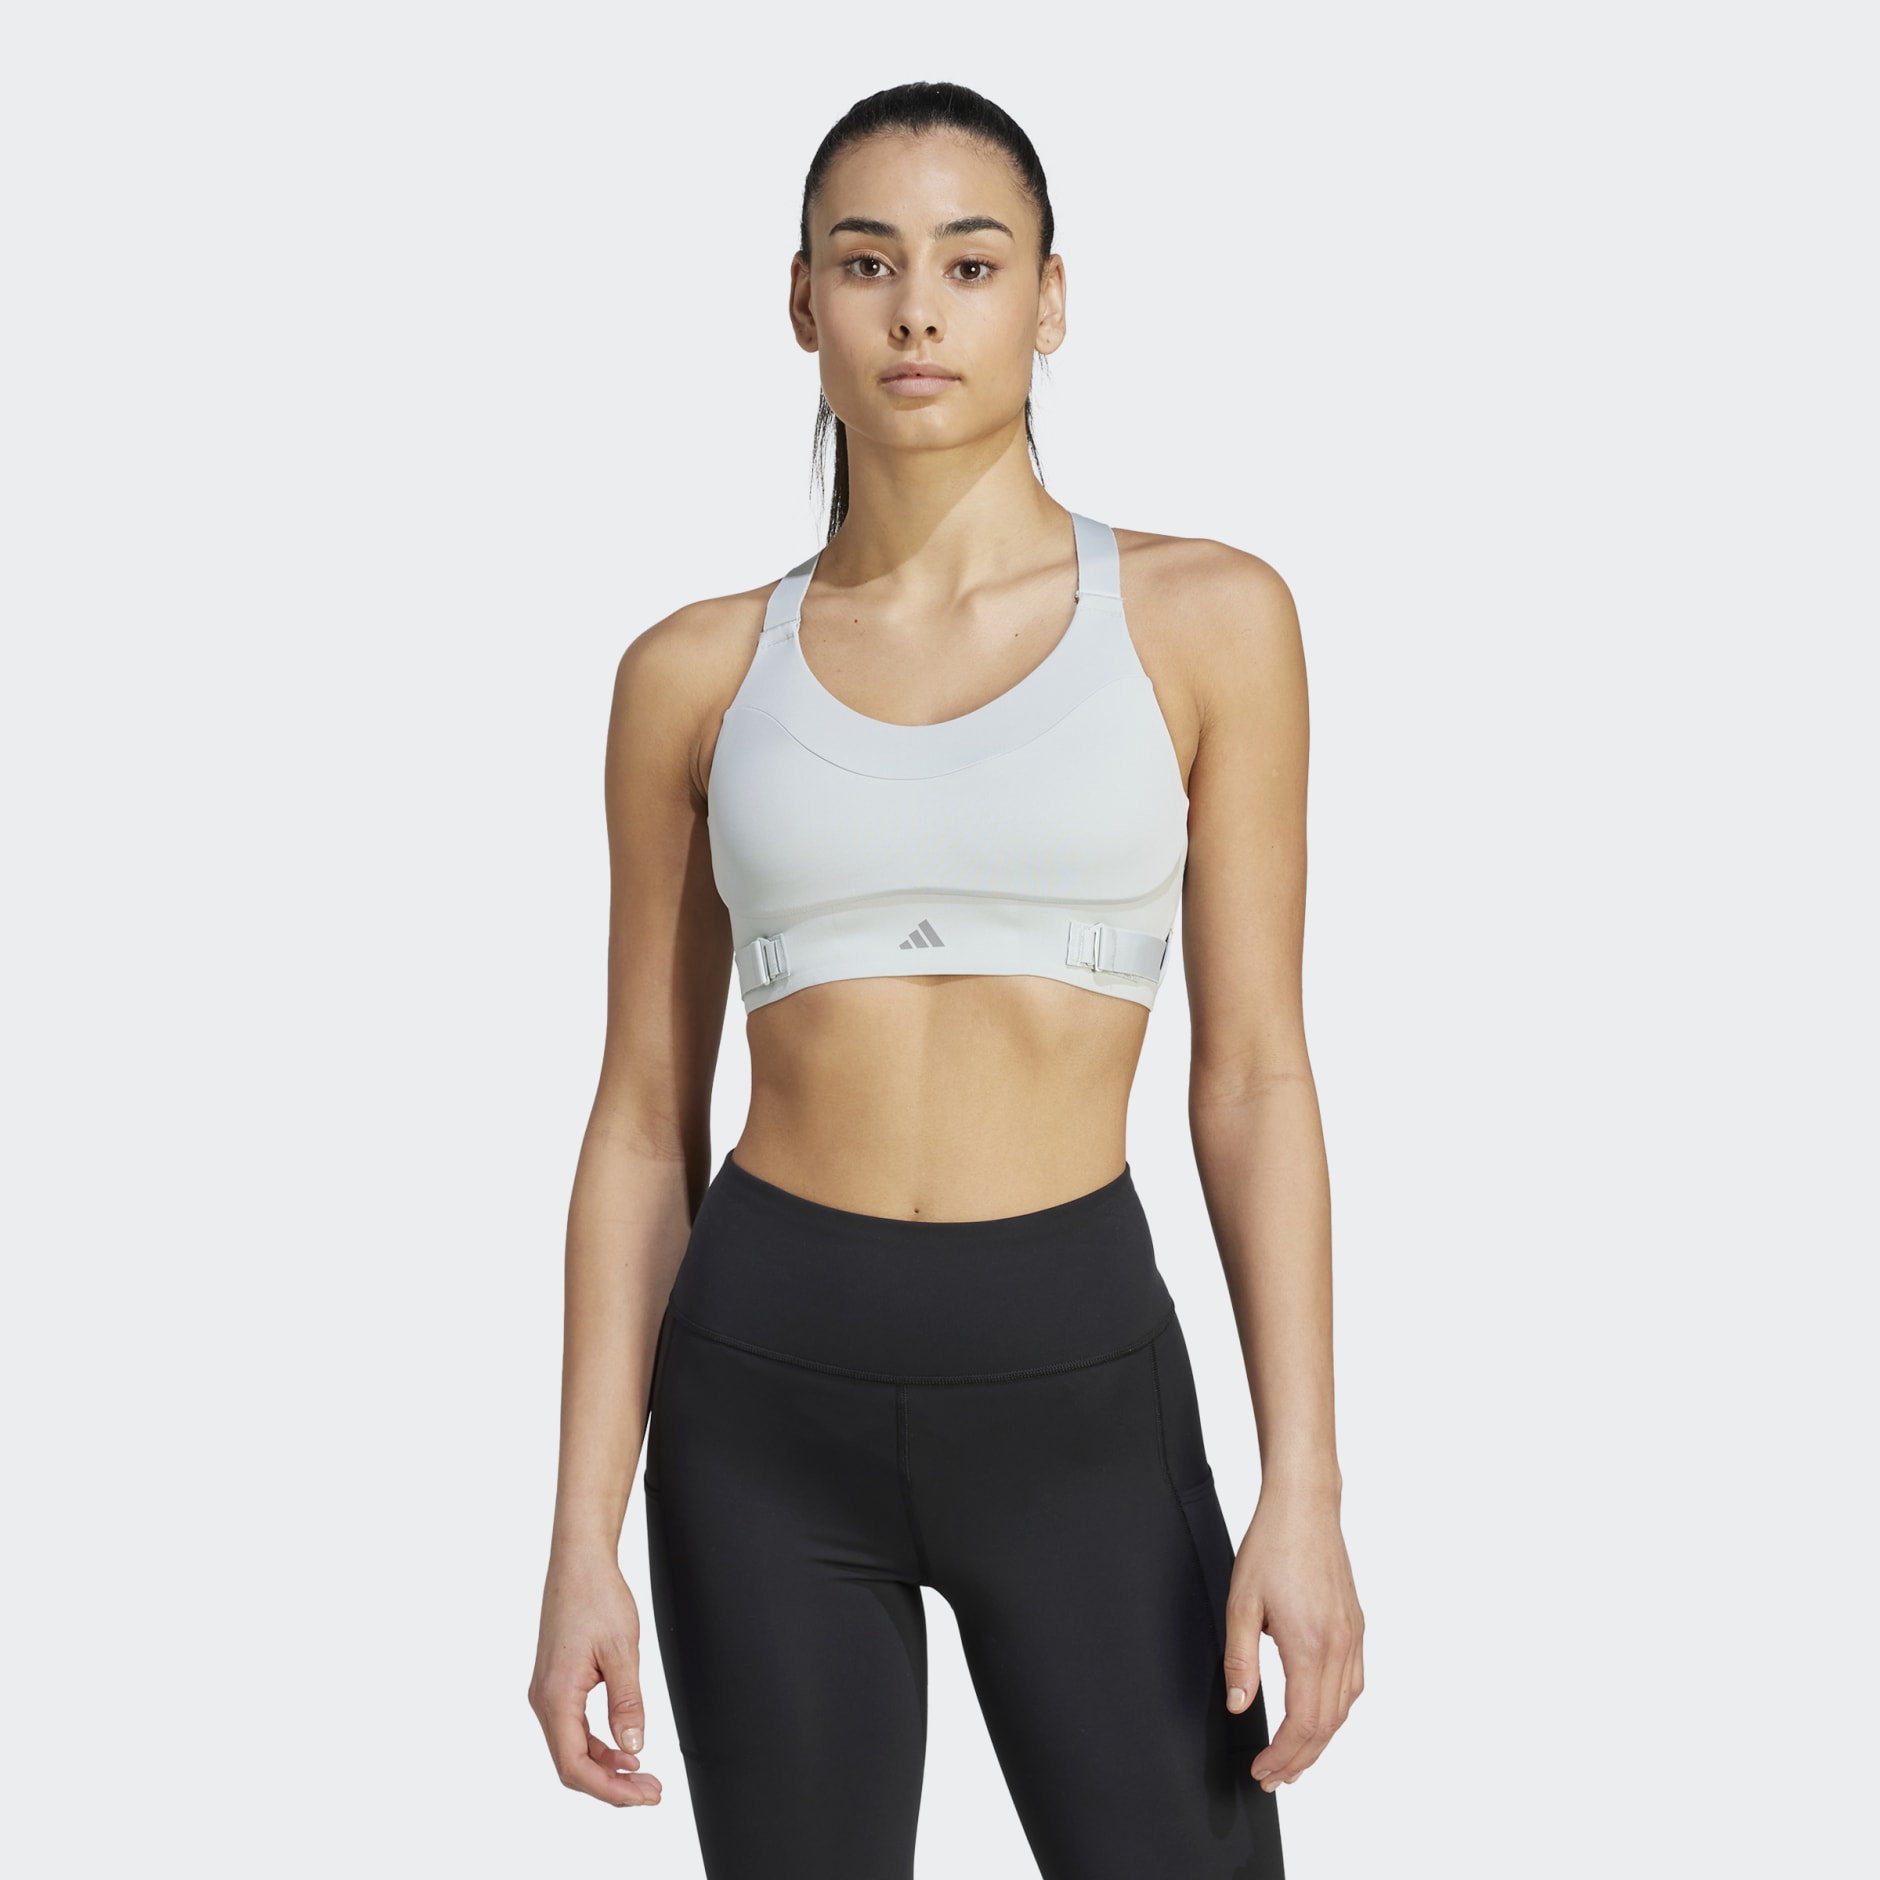 Women's Clothing - Collective Power Fastimpact Luxe High-Support